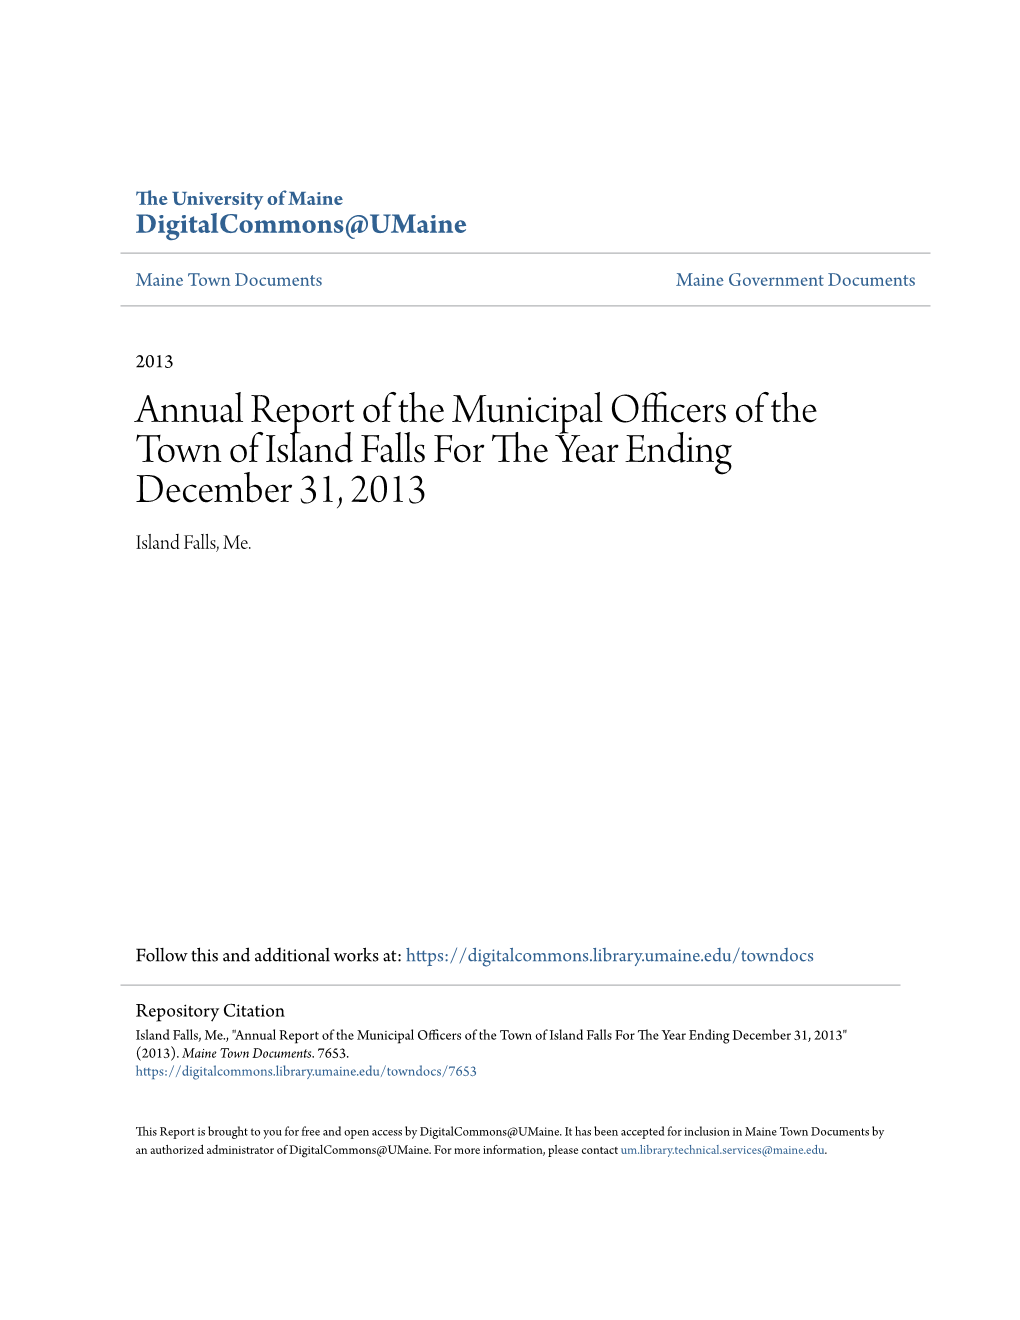 Annual Report of the Municipal Officers of the Town of Island Falls for the Ey Ar Ending December 31, 2013 Island Falls, Me